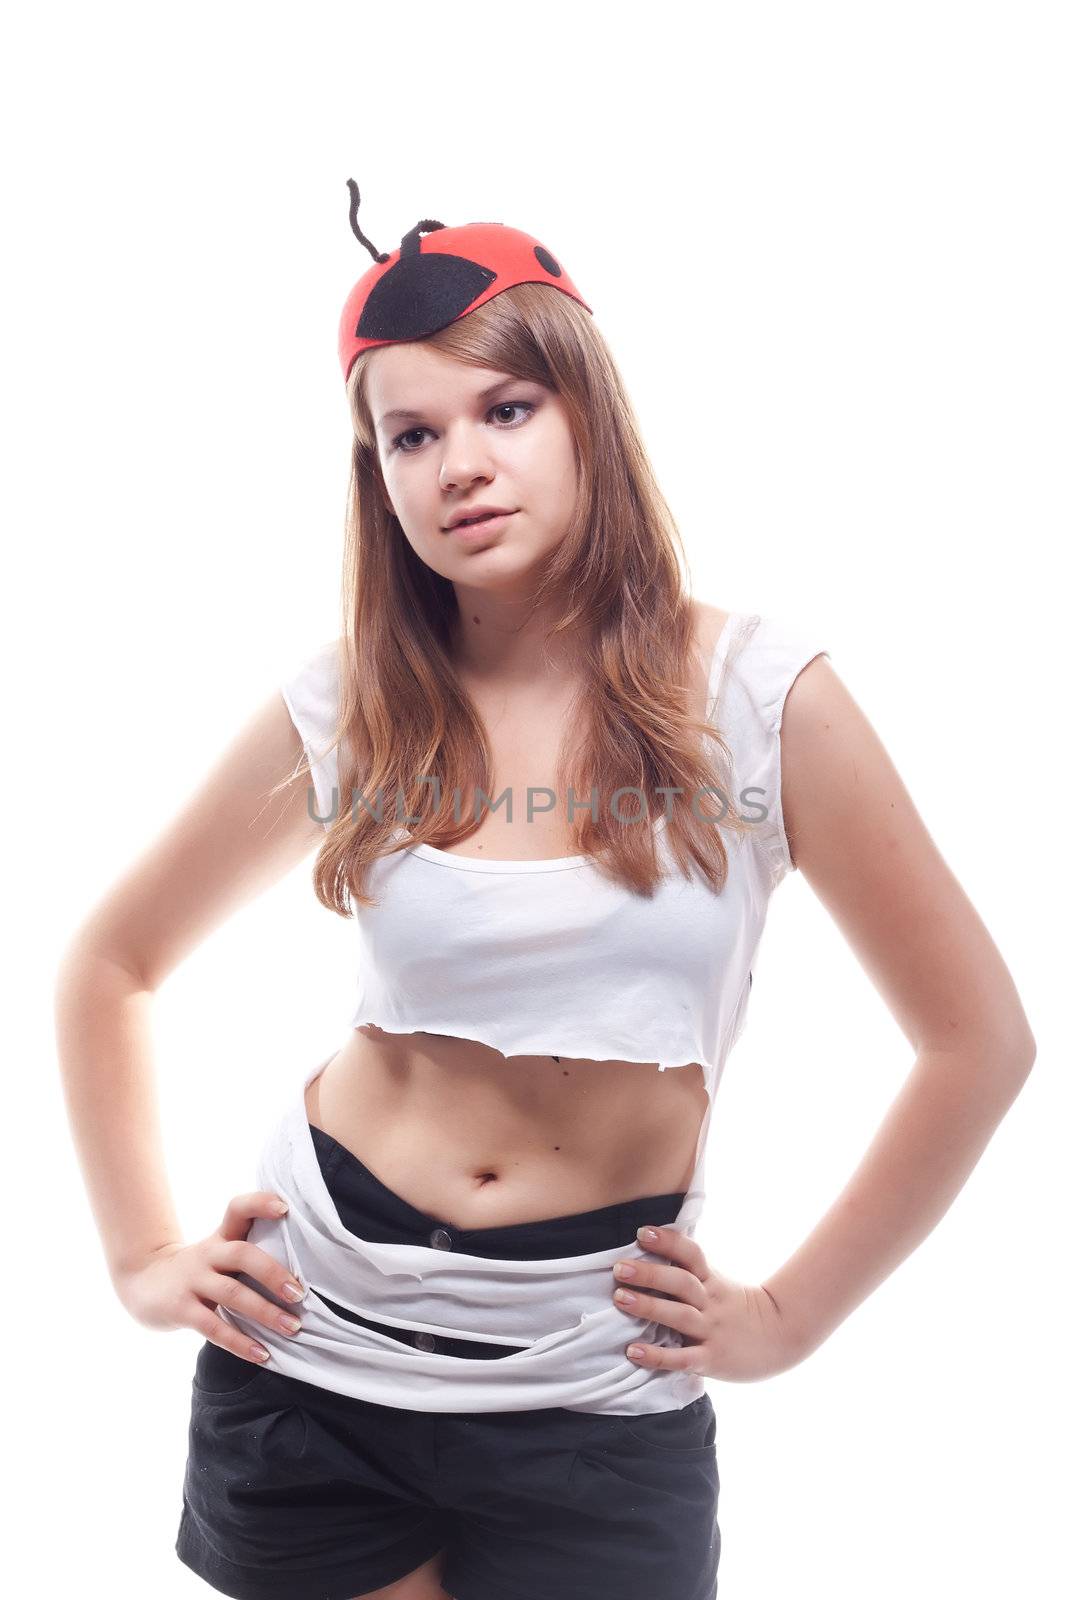 A girl in a torn T-shirt and cap, strange studio photography